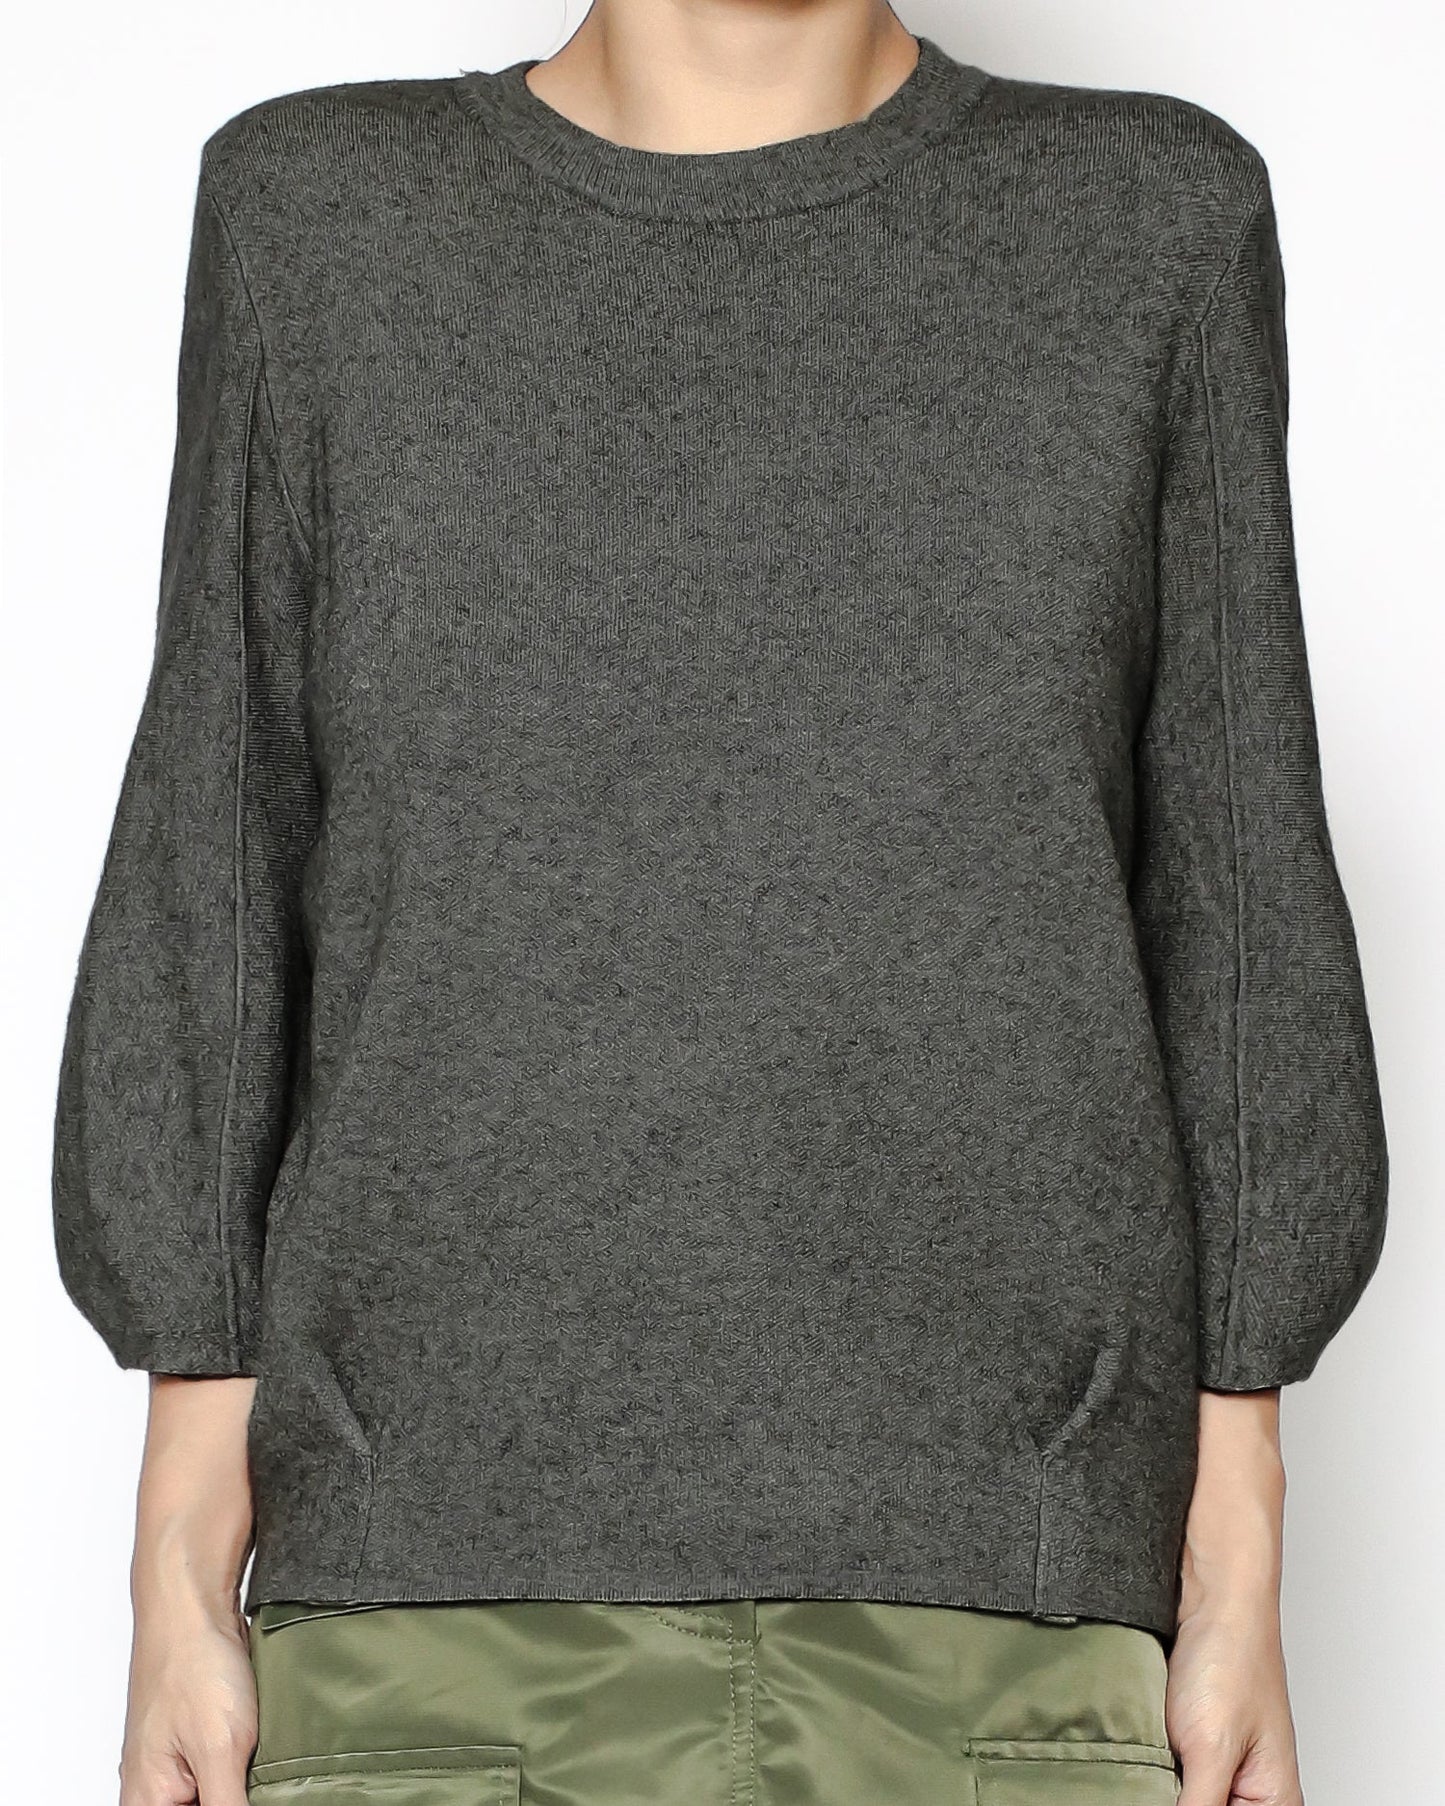 grey green balloon sleeves knitted top *pre-order*